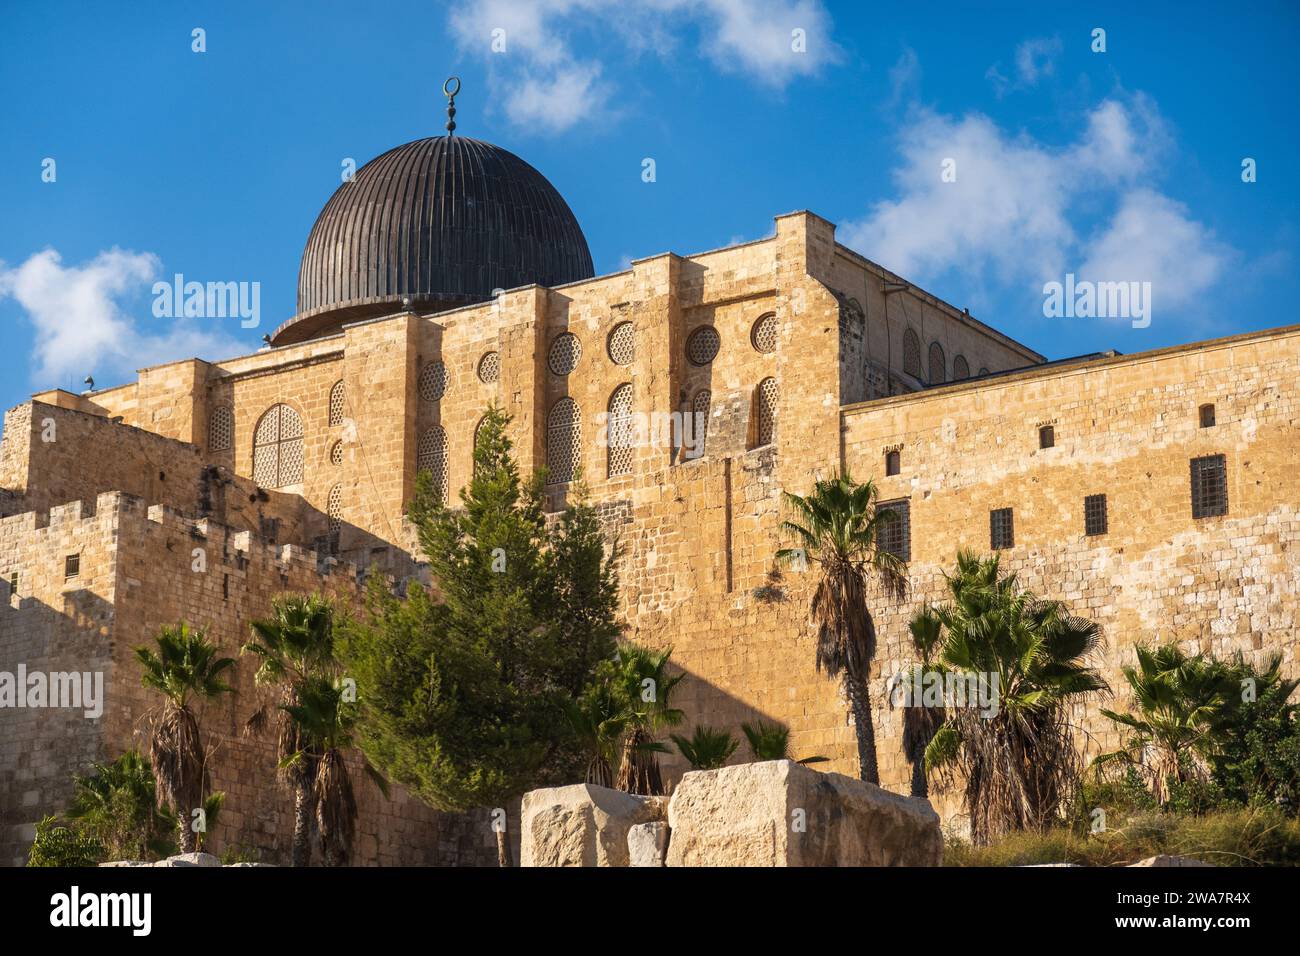 Al-Aqsa Mosque seen from the Western Wall under blue sky, Jerusalem, Israel Stock Photo